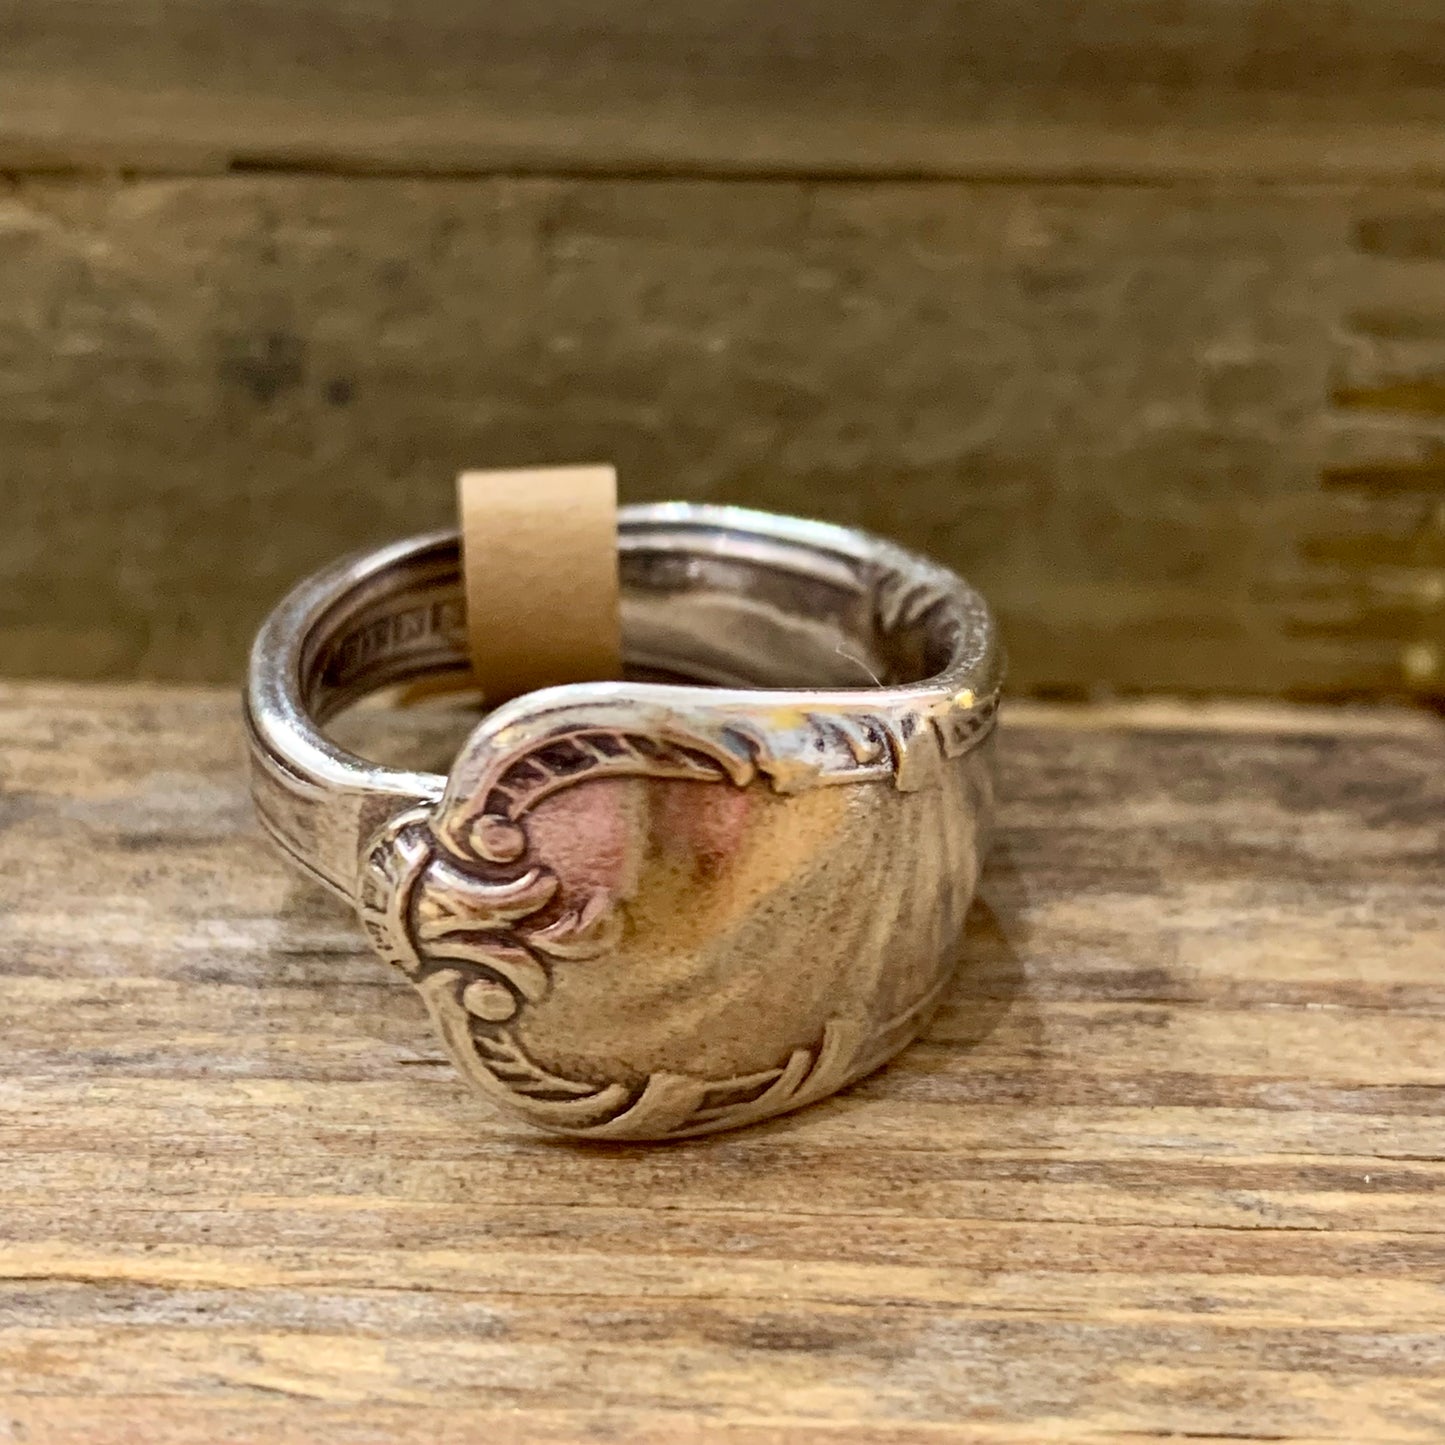 MOLLY MADE- Silverware Ring #3- Classic End